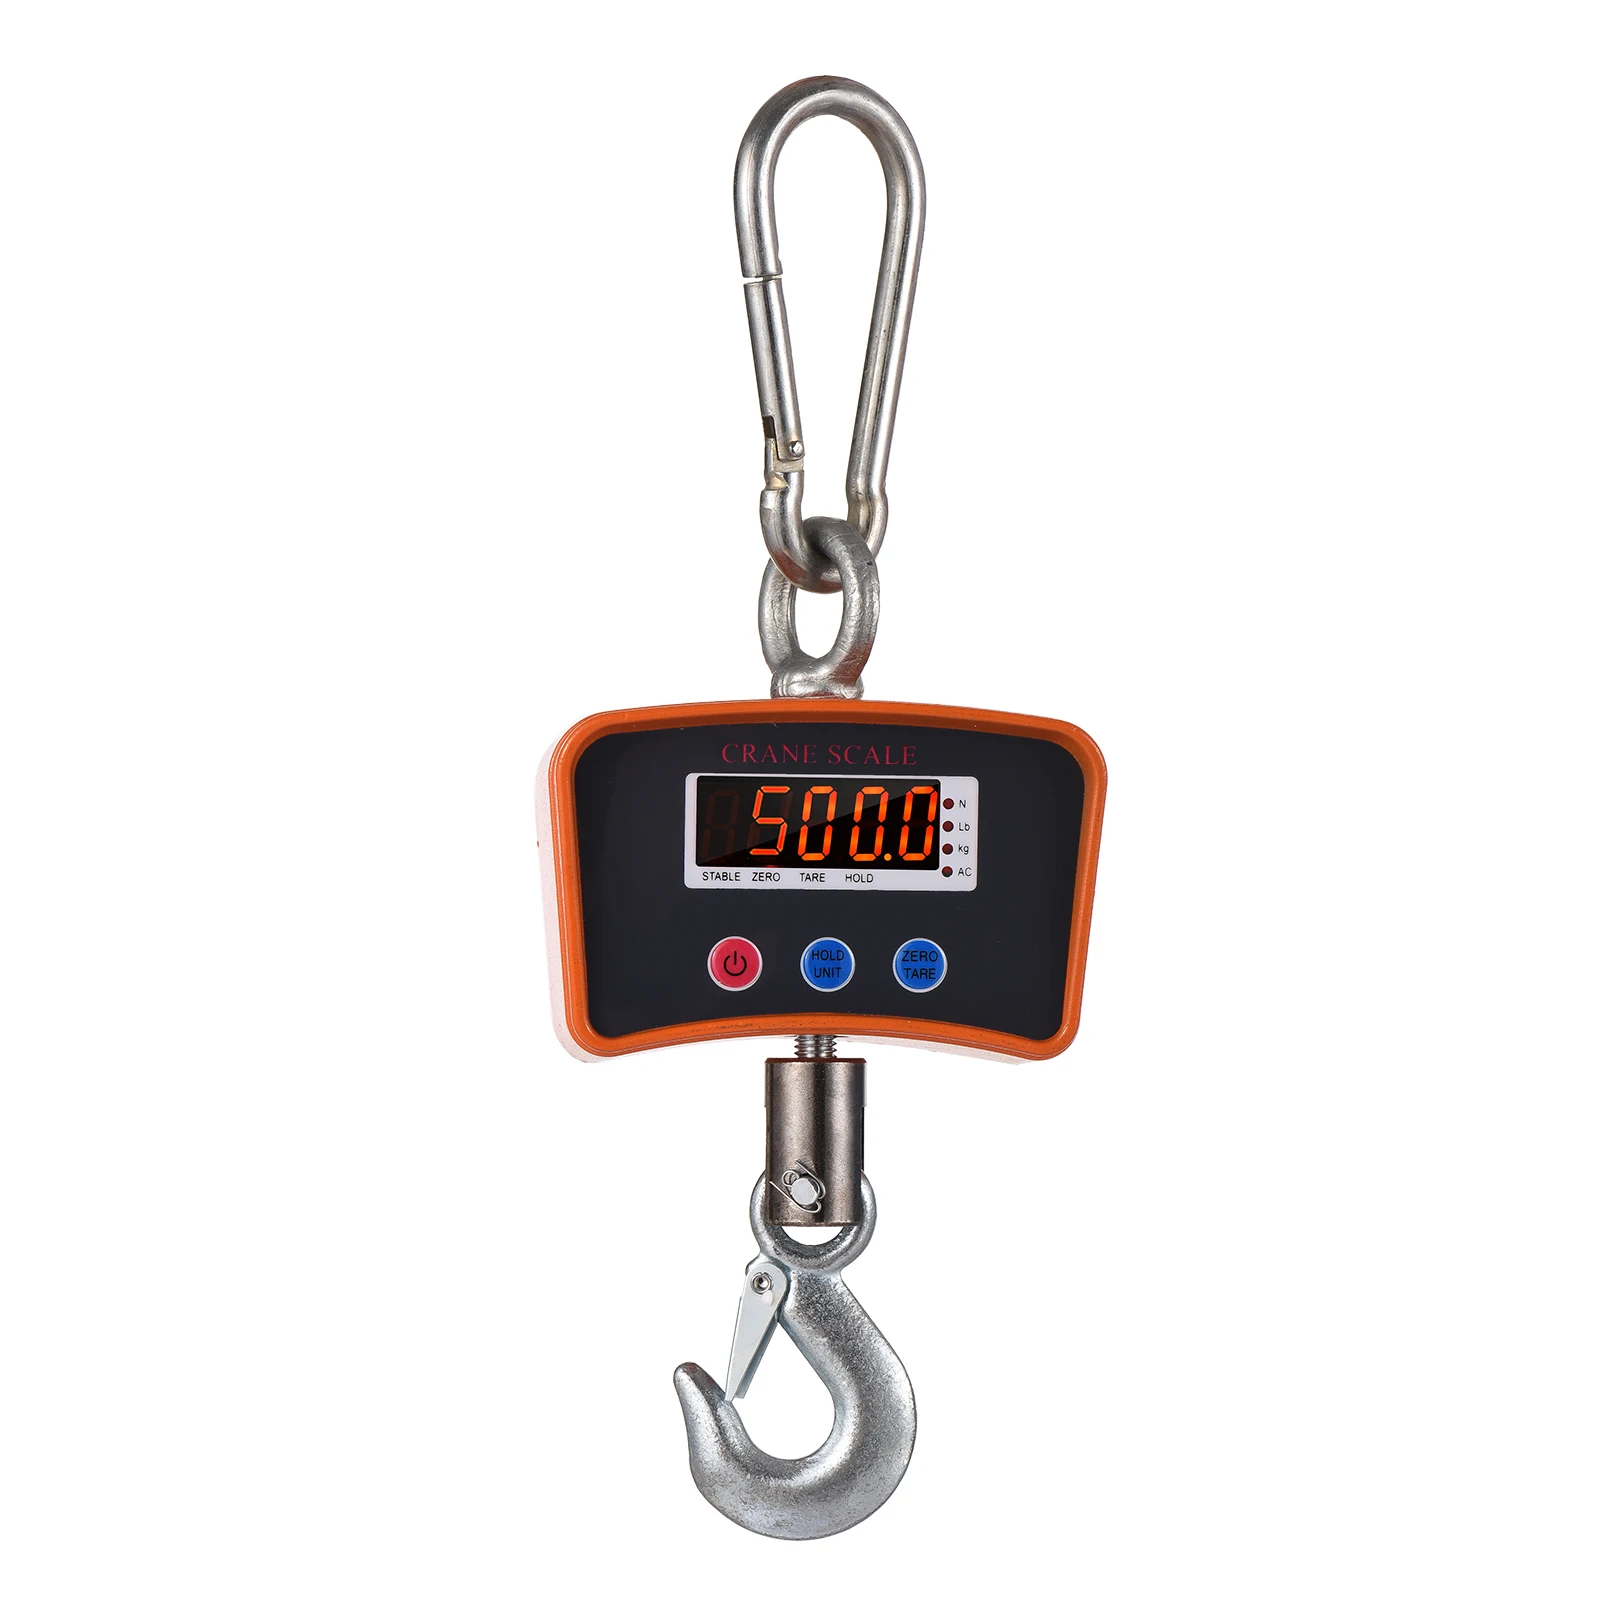 https://ae01.alicdn.com/kf/S705cc94d433047179dc45987b59cb4d1H/500kg-1102lbs-Digital-LED-Hanging-Scale-Portable-Heavy-Duty-Crane-Scale-1500mAh-Rechargeable-Hook-Scales-Unit.jpg